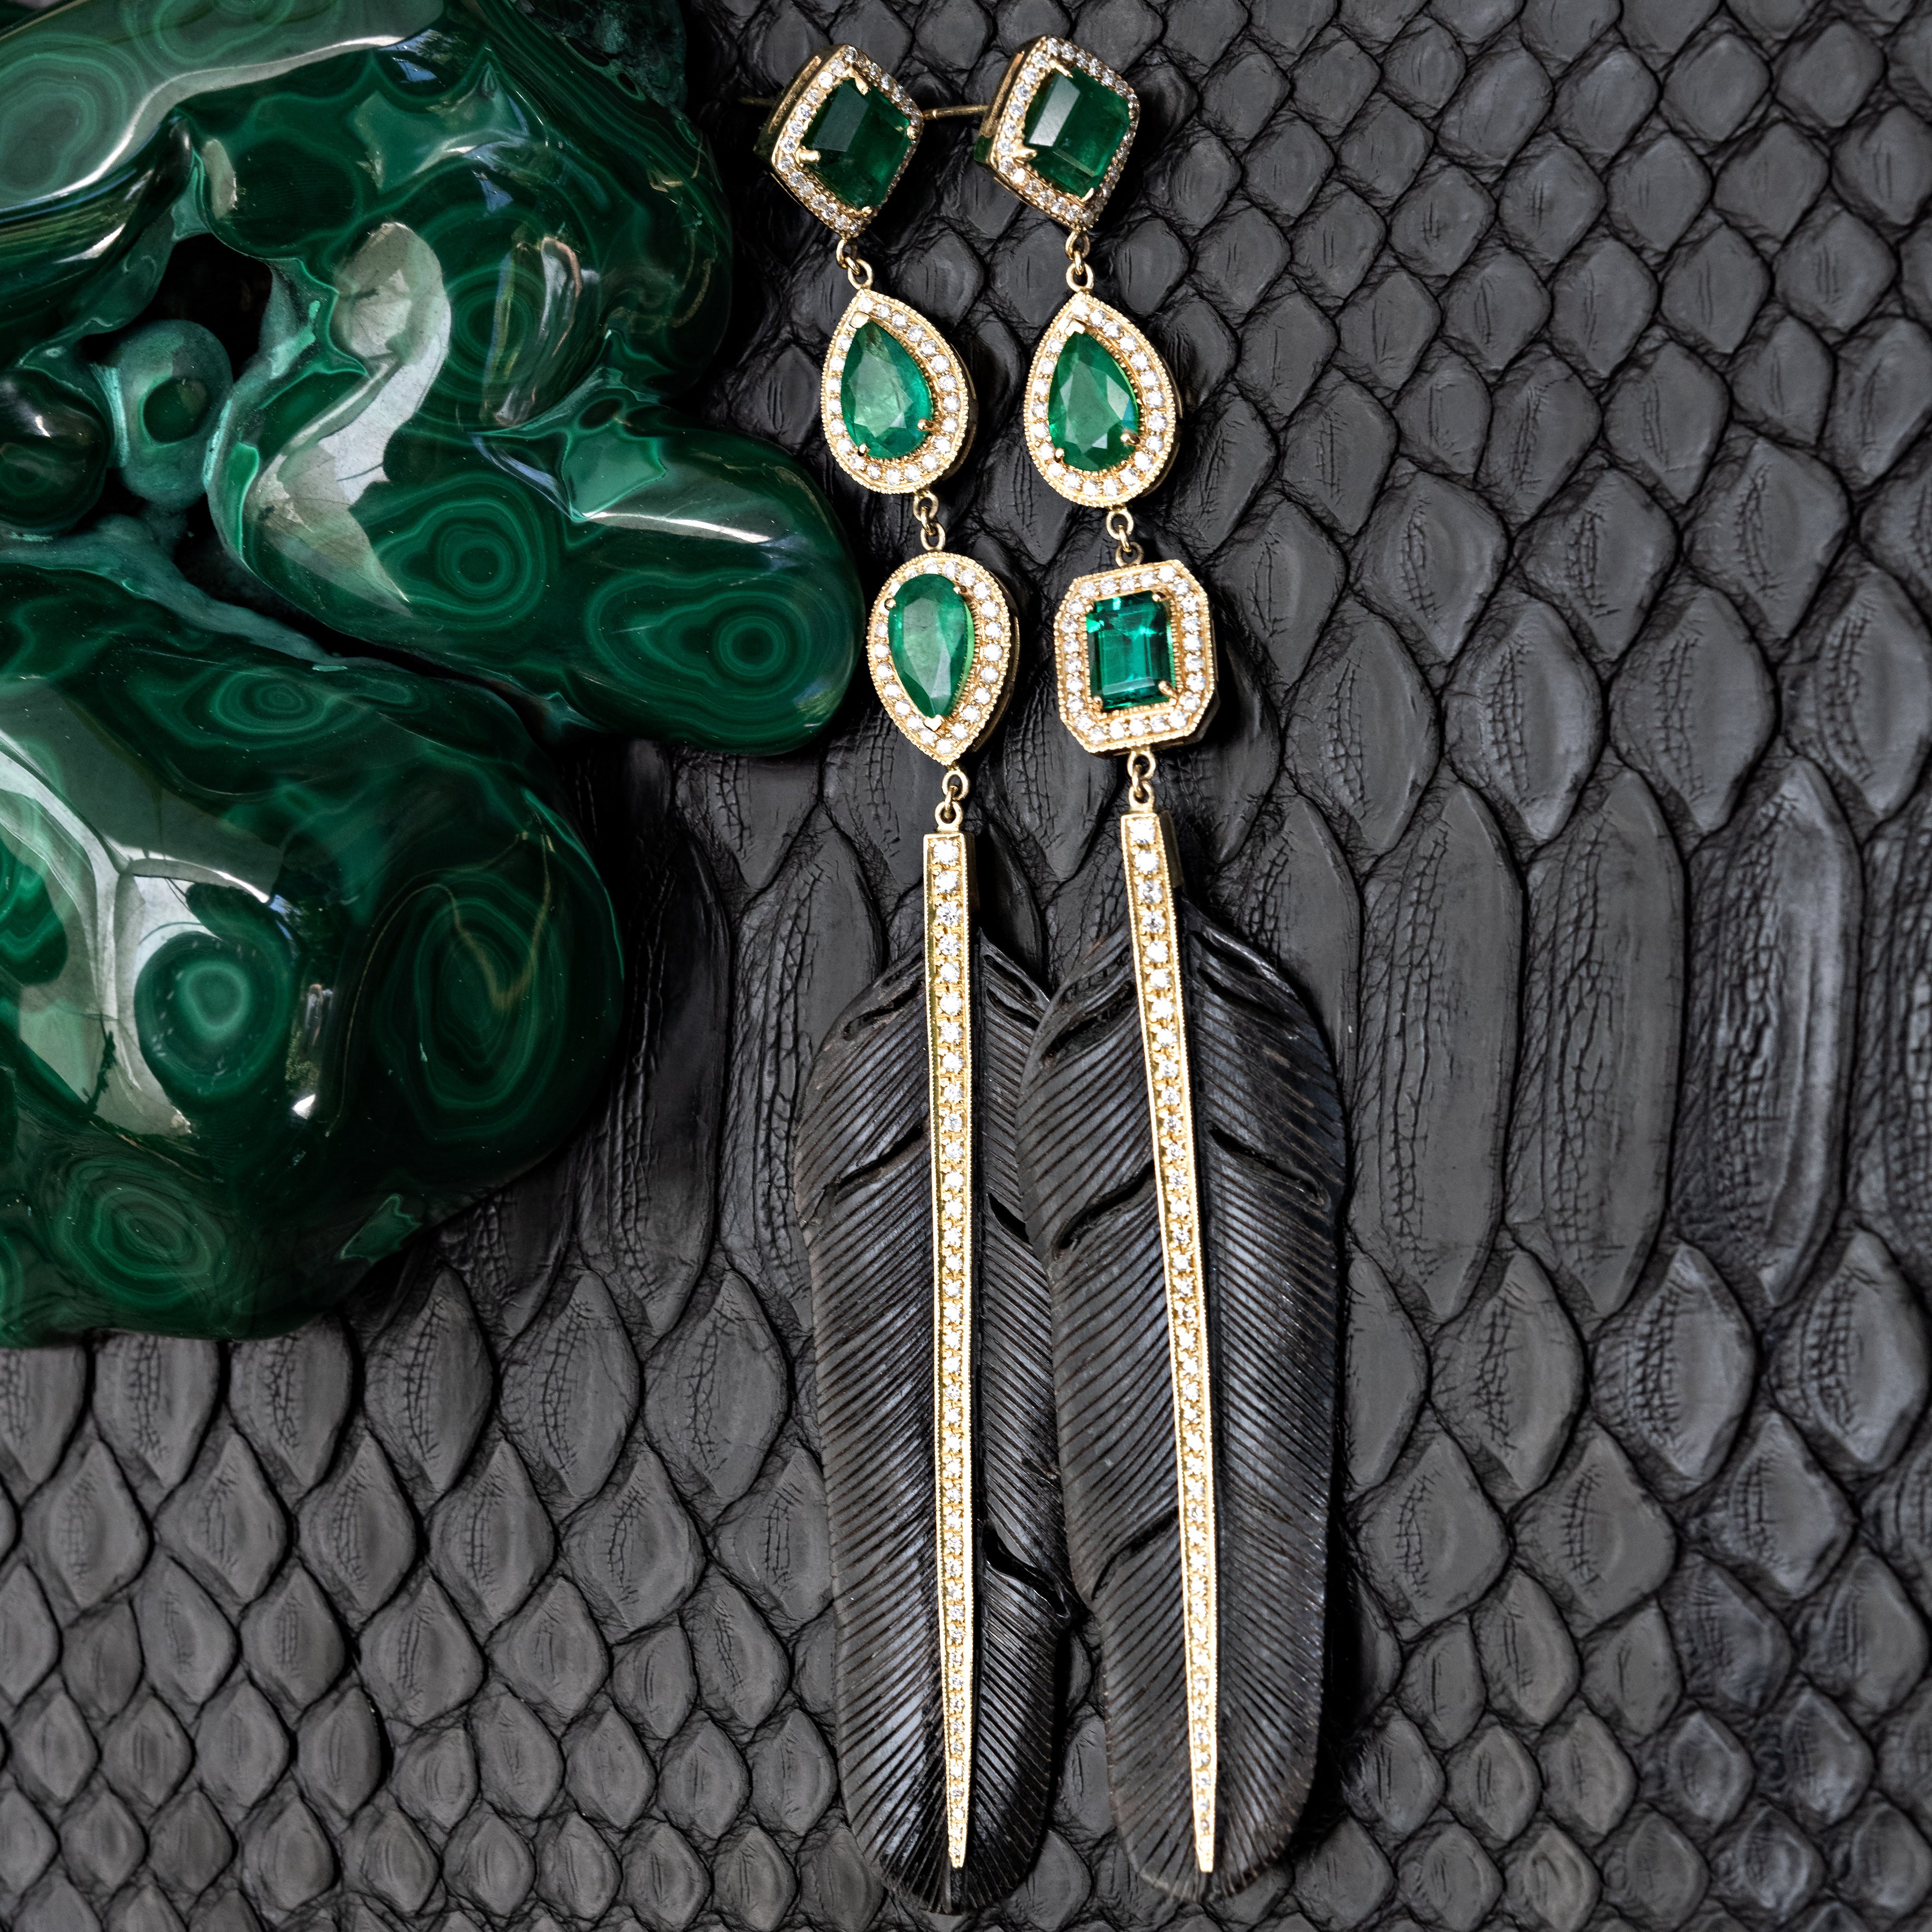 PAVE TRIPLE EMERALD + PAVE BLACK FEATHER EARRINGS